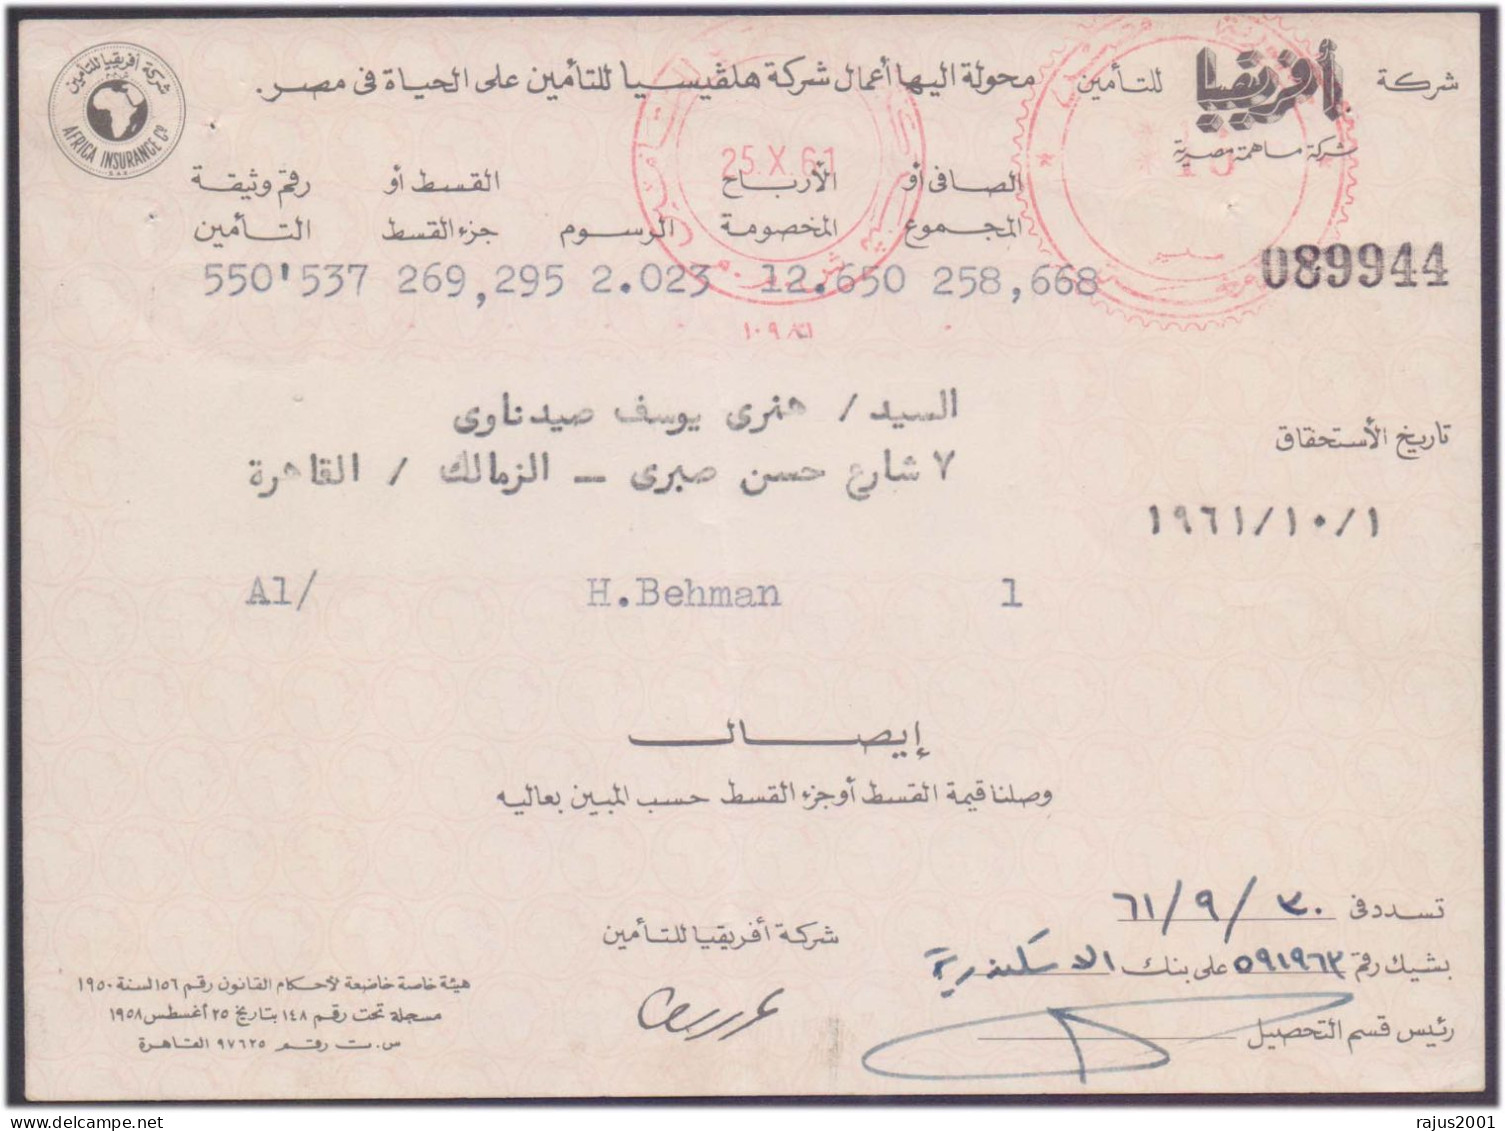 Business Of Helqisia Life Insurance Company In Egypt, RED METER FRANK, EMA, Receipt Old Document Egypt 1960 - Brieven En Documenten